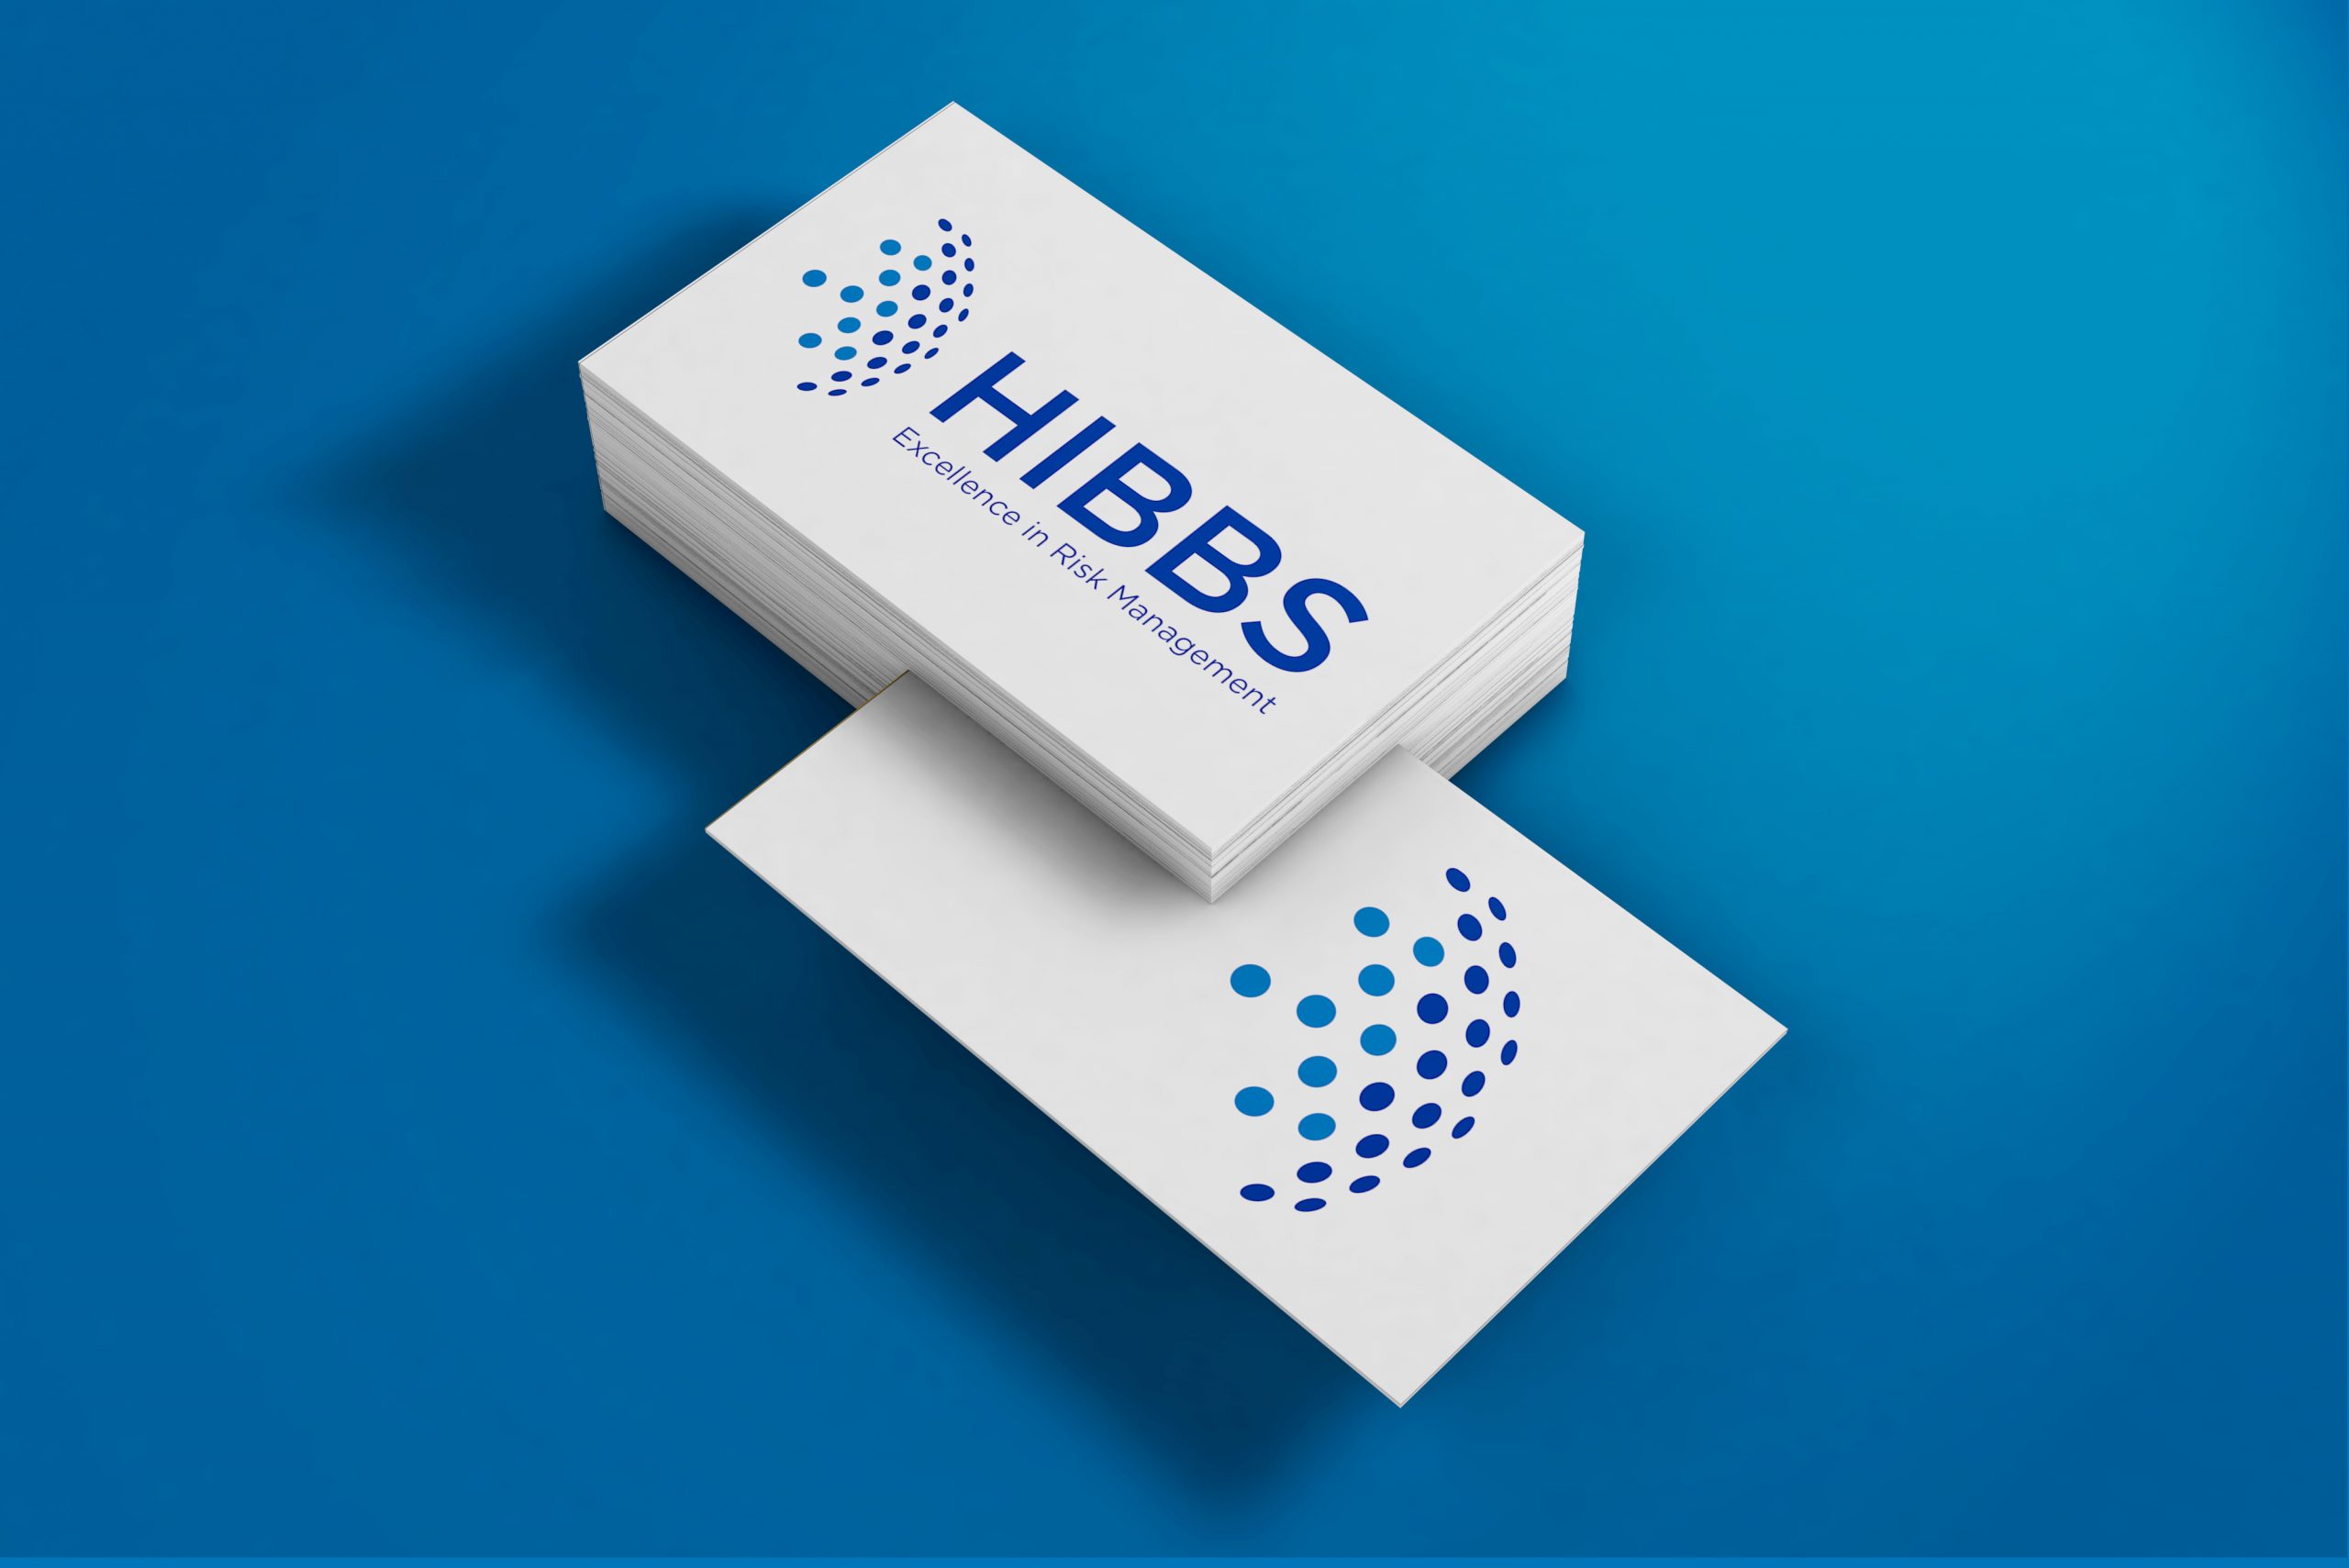 Hibbs Business card design by think creative agency